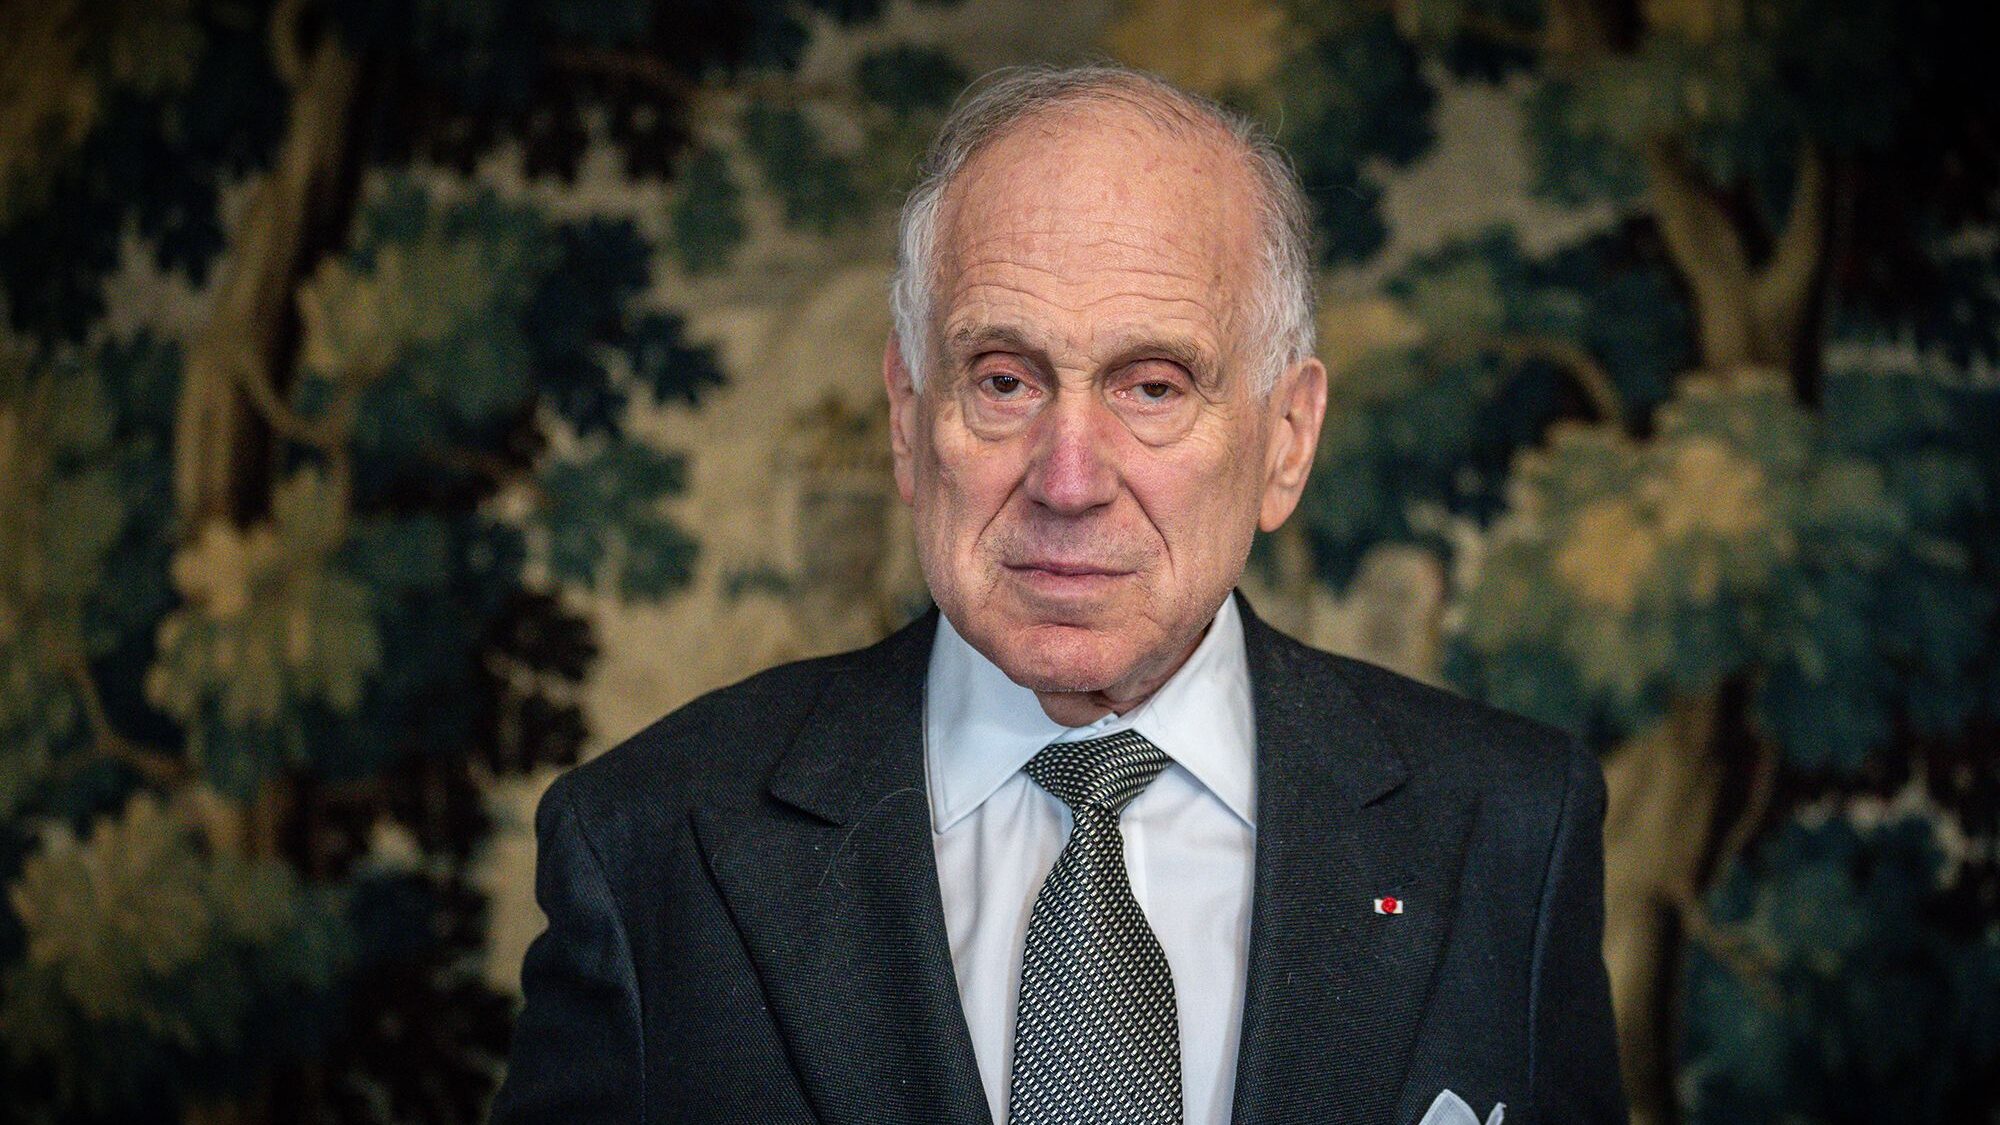 Ronald Lauder, president of the World Jewish Congress, and a powerful financial backer of the Unive...